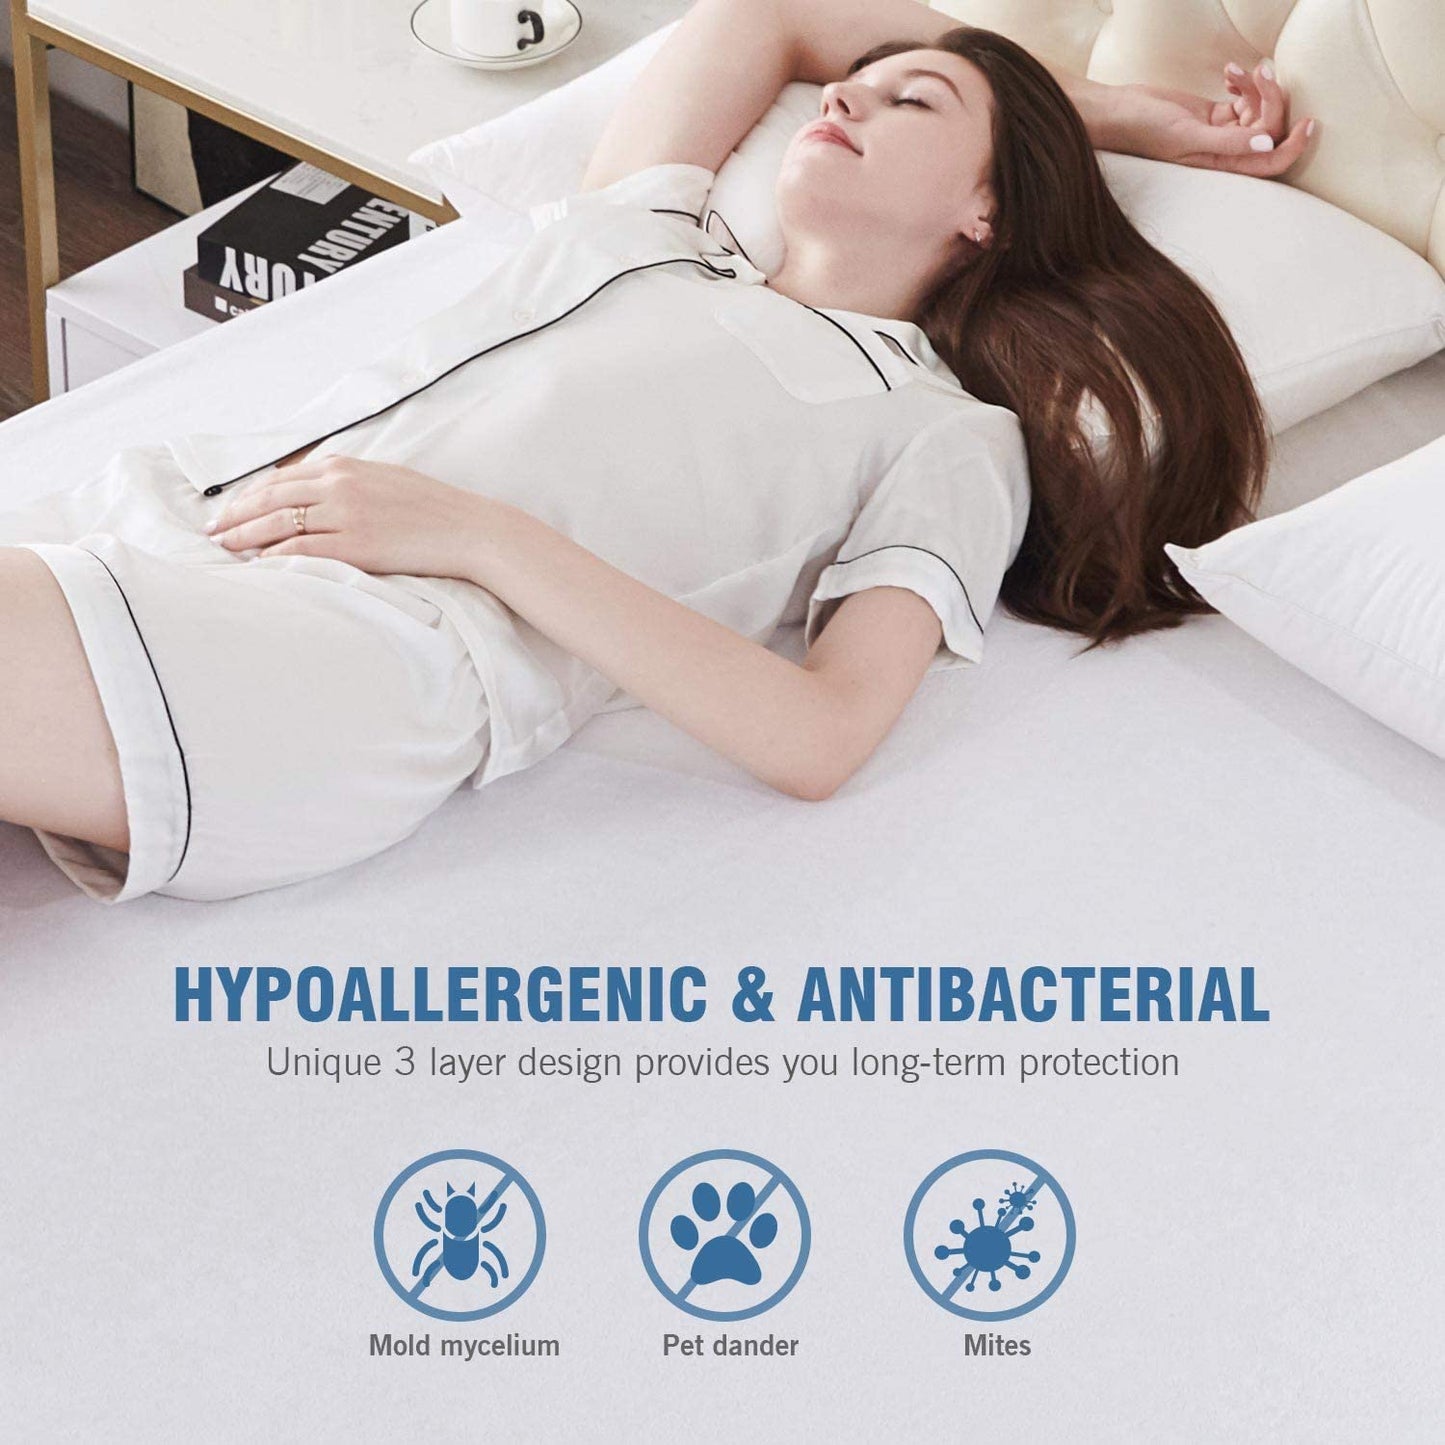 Vinyl-Free Hypoallergenic and Noiseless Waterproof Mattress Protector Fitted up to 18 Inches Deep Pocket